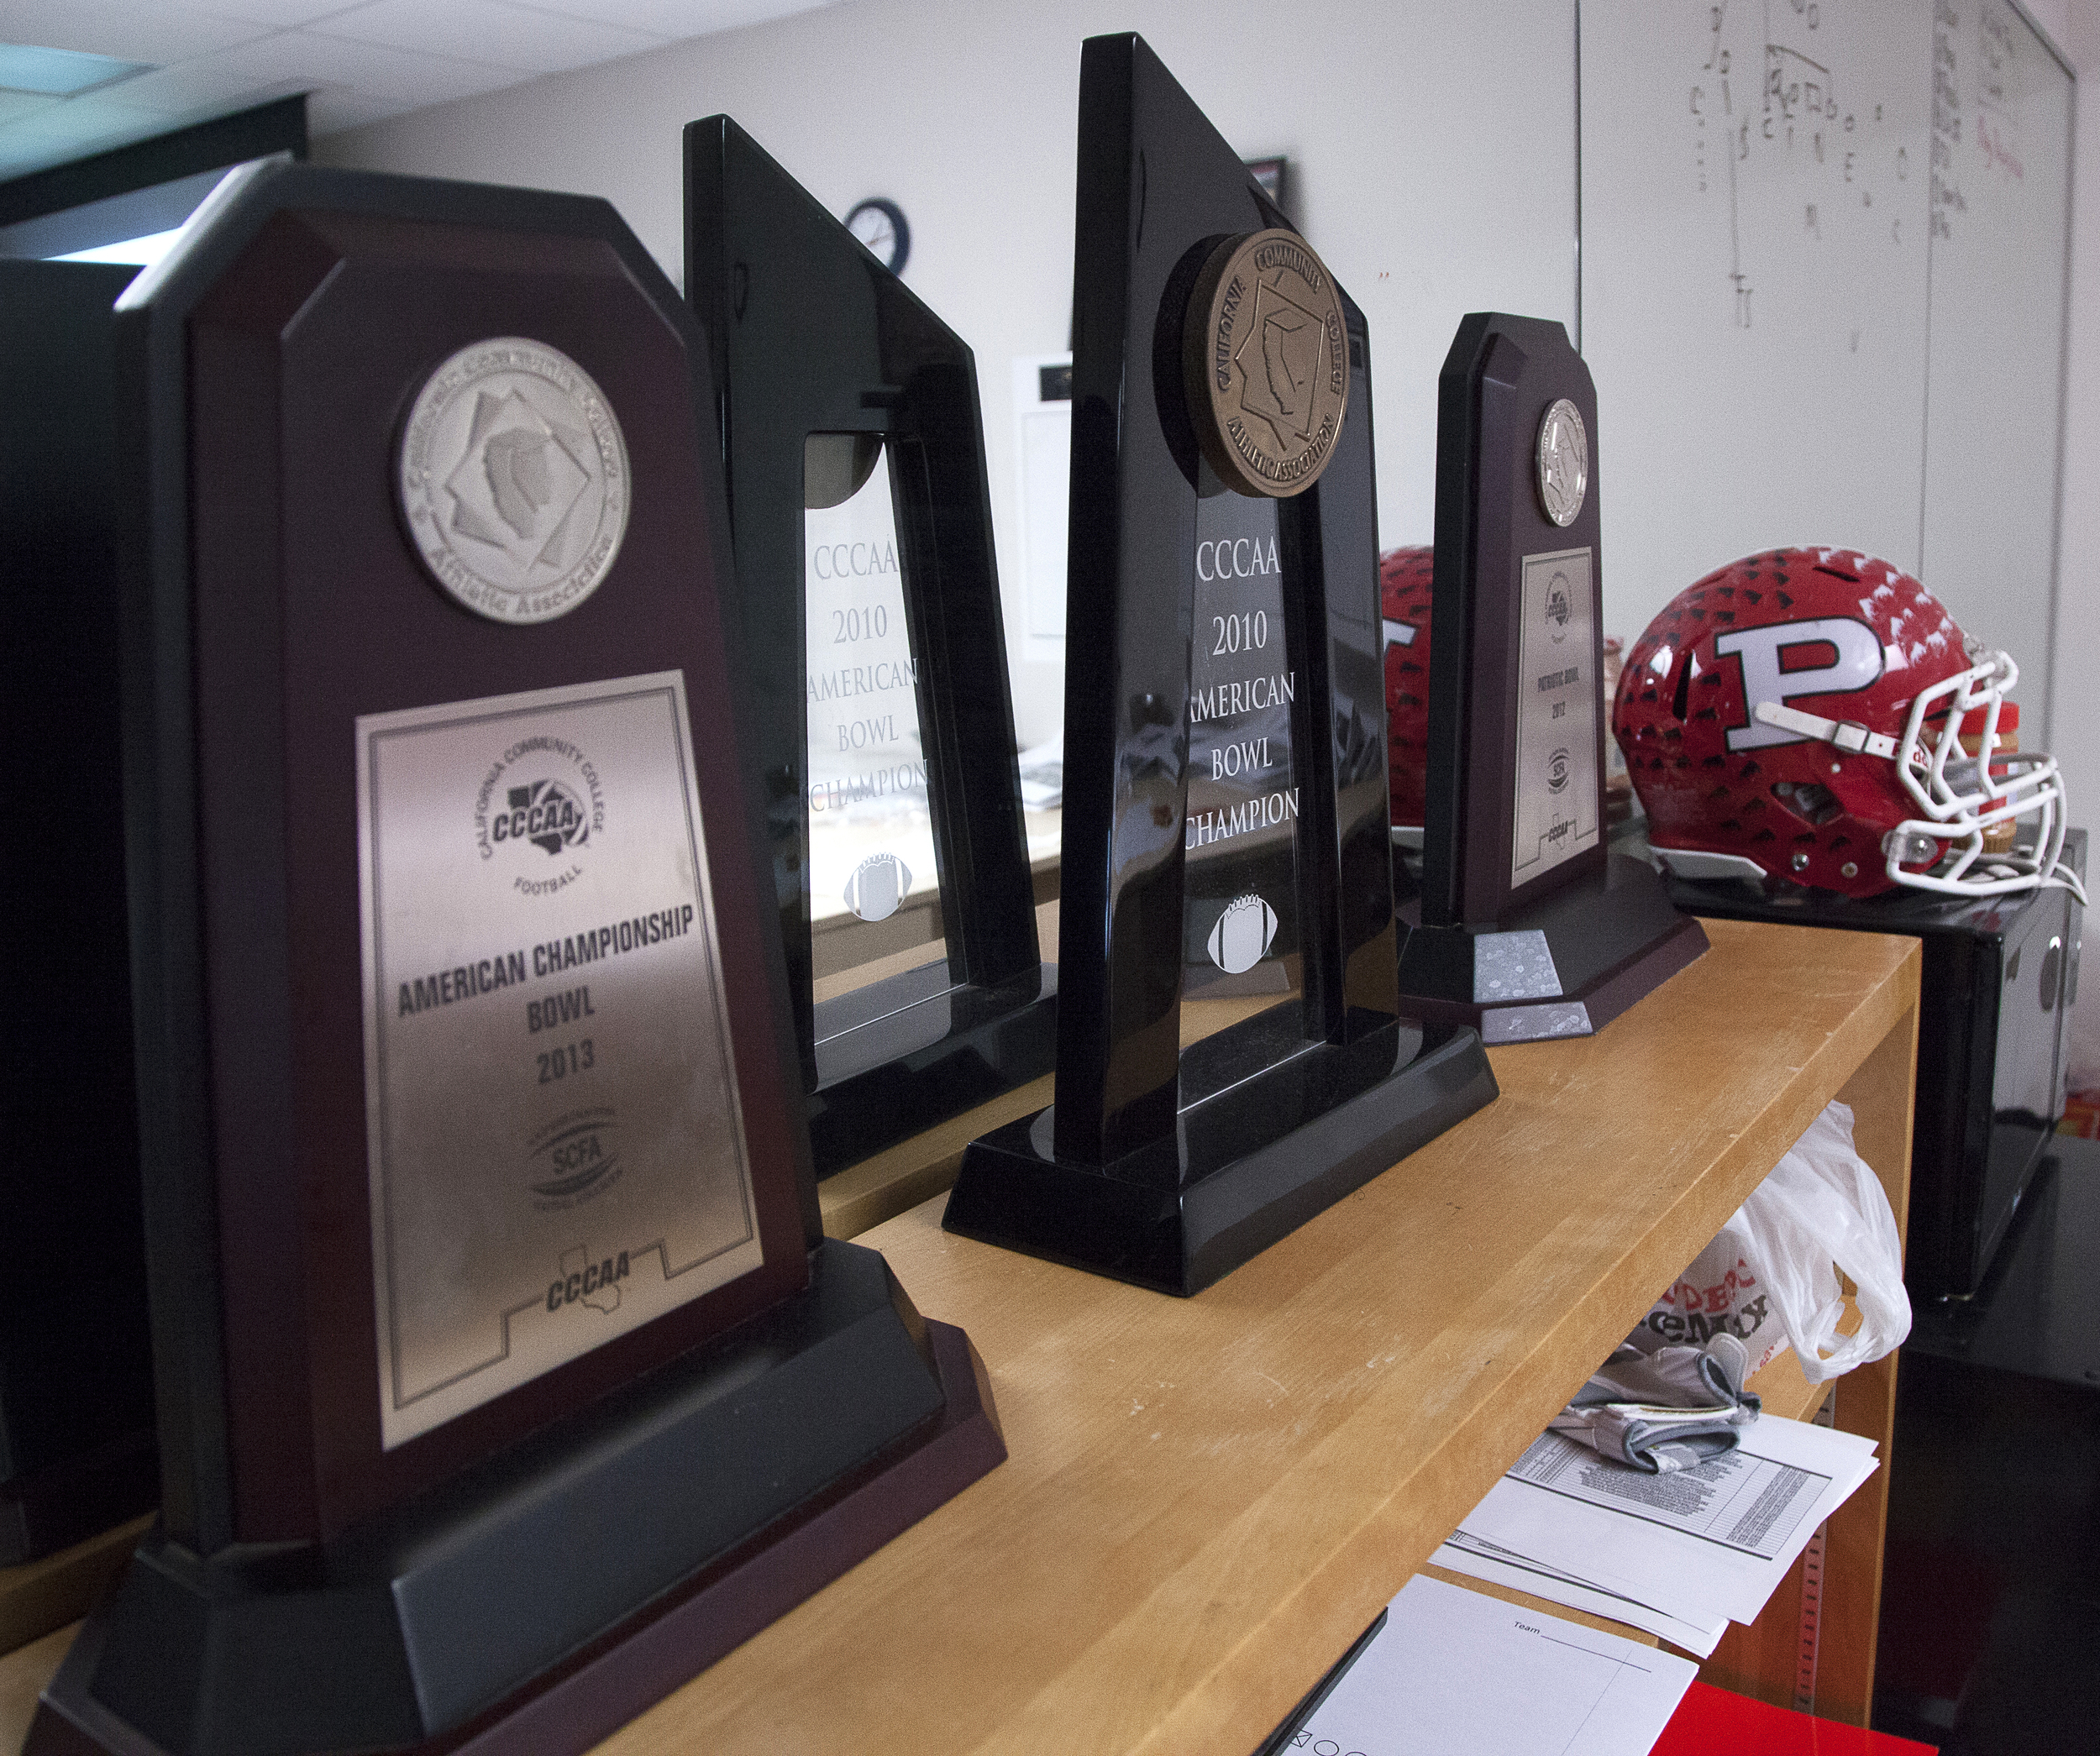  Trophies from past seasons line the top of a bookcase inside the “war room” where the football defensive team meet. Thursday, May 21, 2015. Woodland Hills, Calif.&nbsp;    